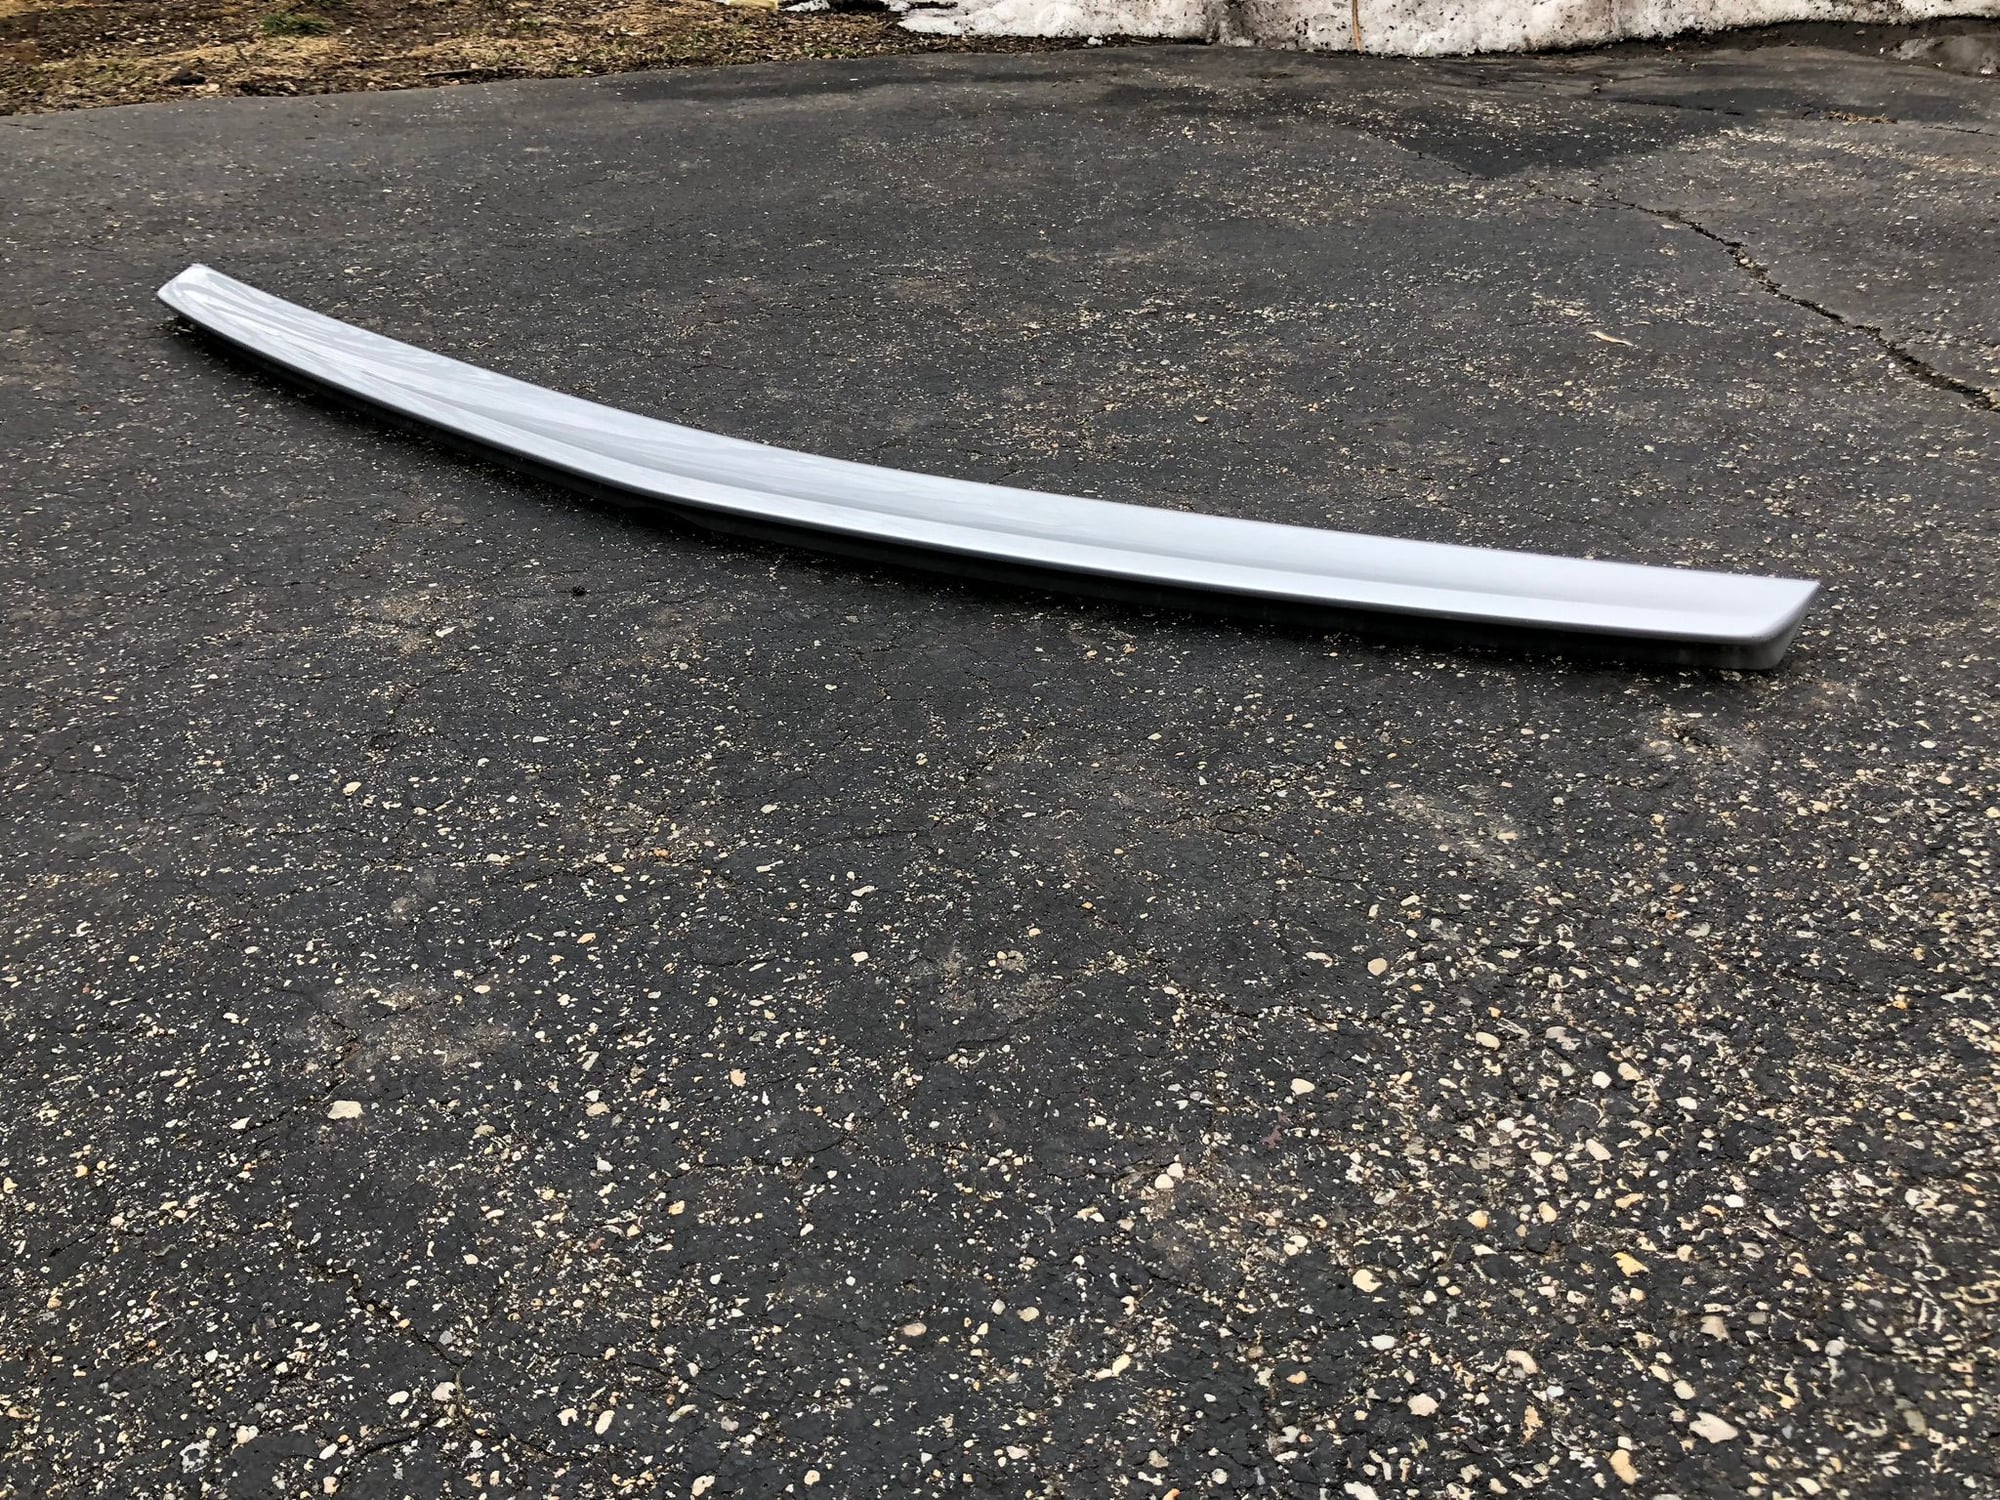 Exterior Body Parts - W212 E63S AMG OEM rear deck lid spoiler - Used - 2009 to 2016 Mercedes-Benz E350 - 2009 to 2016 Mercedes-Benz E400 - 2009 to 2016 Mercedes-Benz E550 - 2009 to 2016 Mercedes-Benz E63 AMG - 2009 to 2016 Mercedes-Benz E63 AMG S - Port Washington, NY 11050, United States